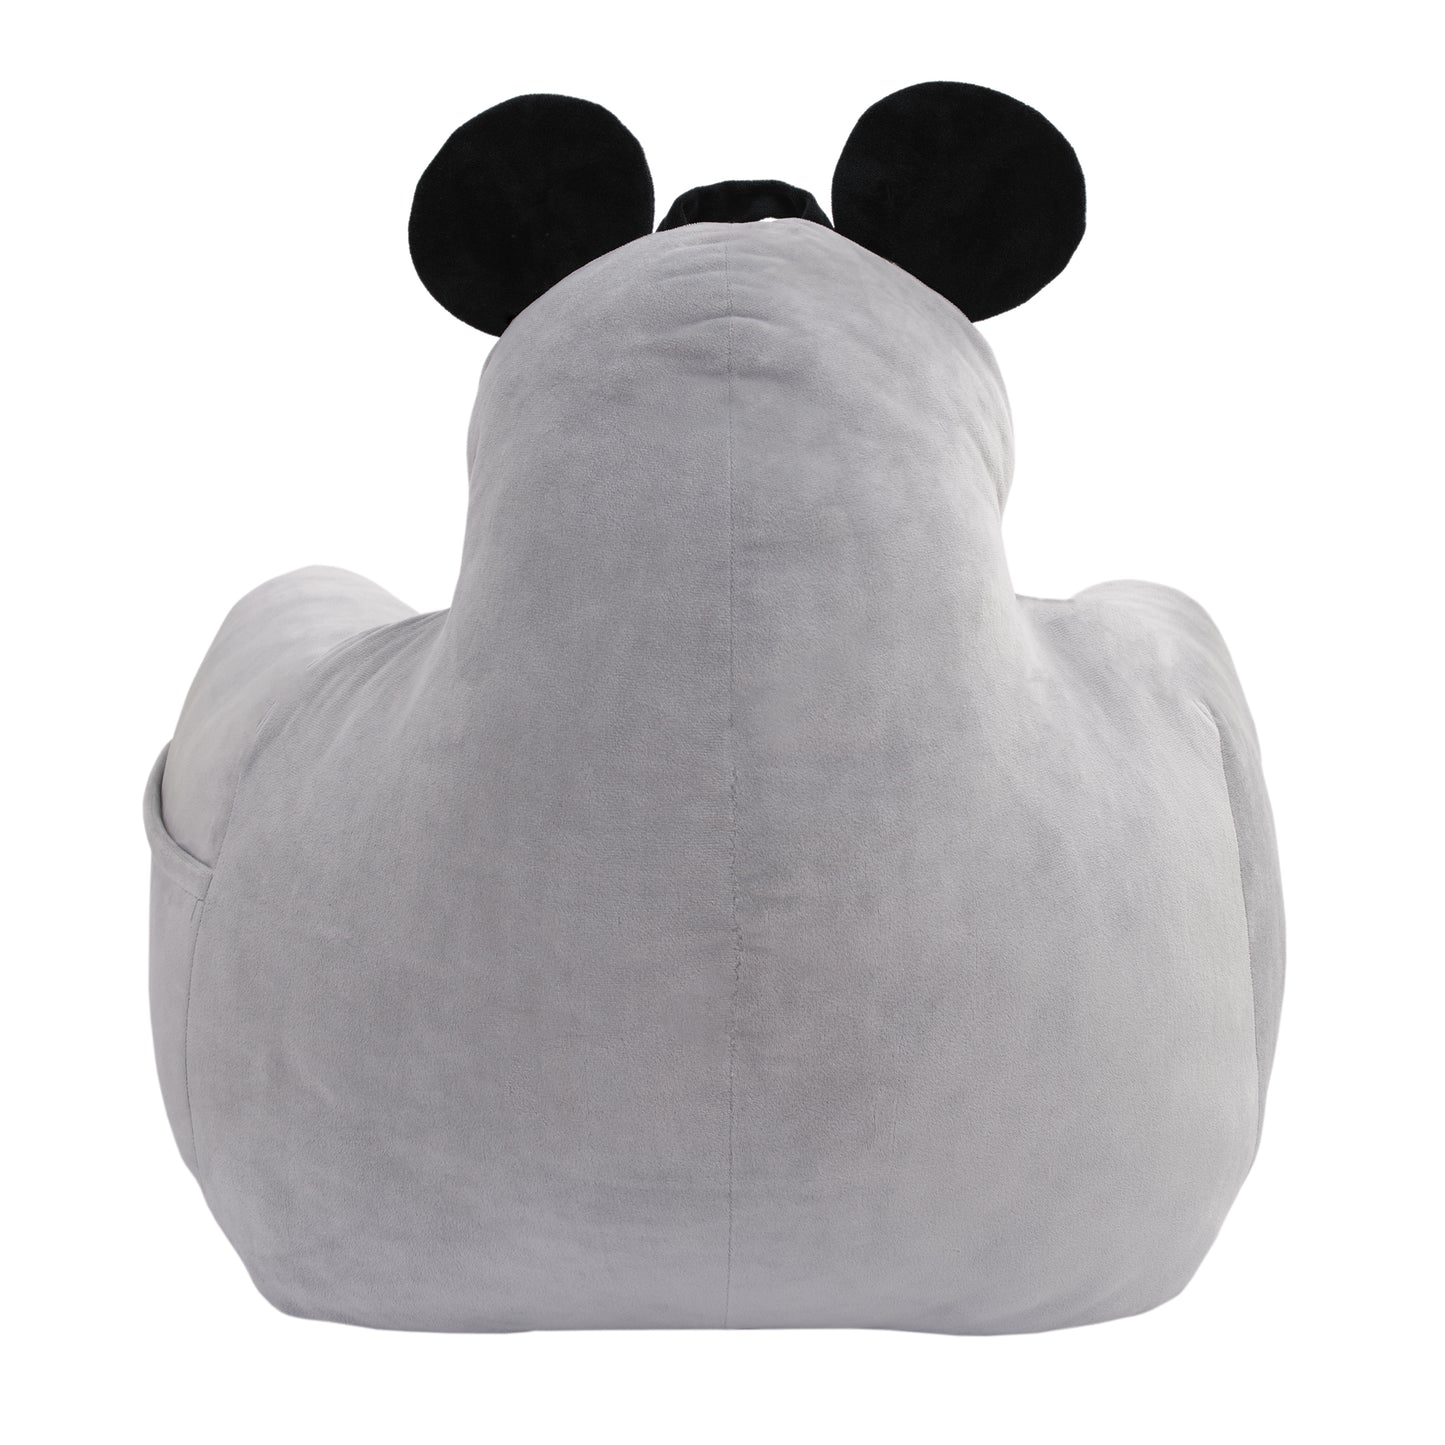 Disney Mickey Mouse Shaped Gray, Black, and White Plush Chair